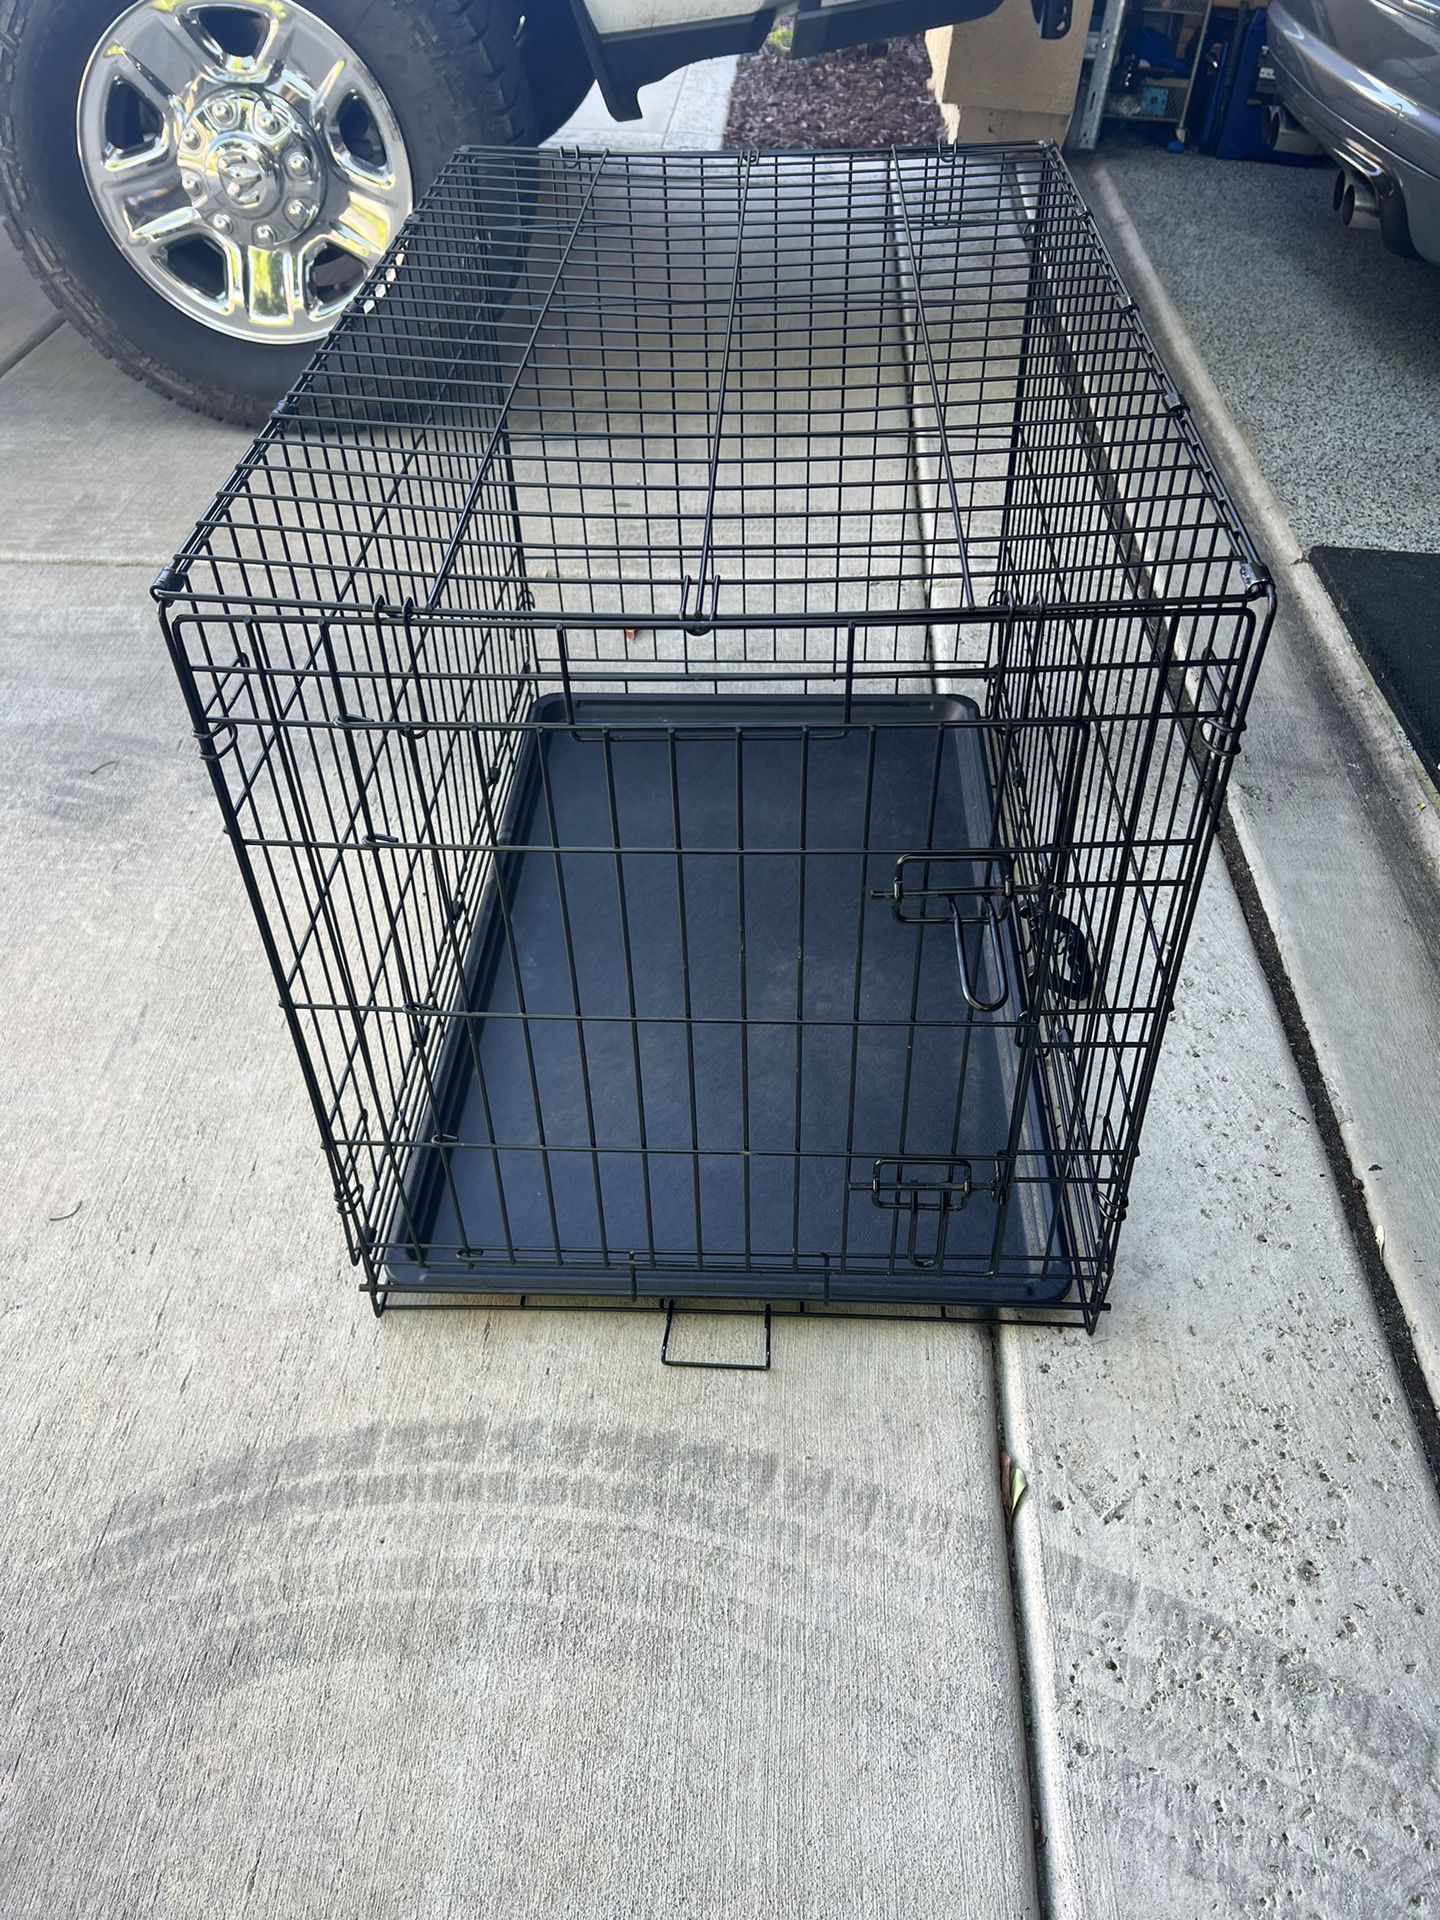 Metal Cage Crate For Dogs